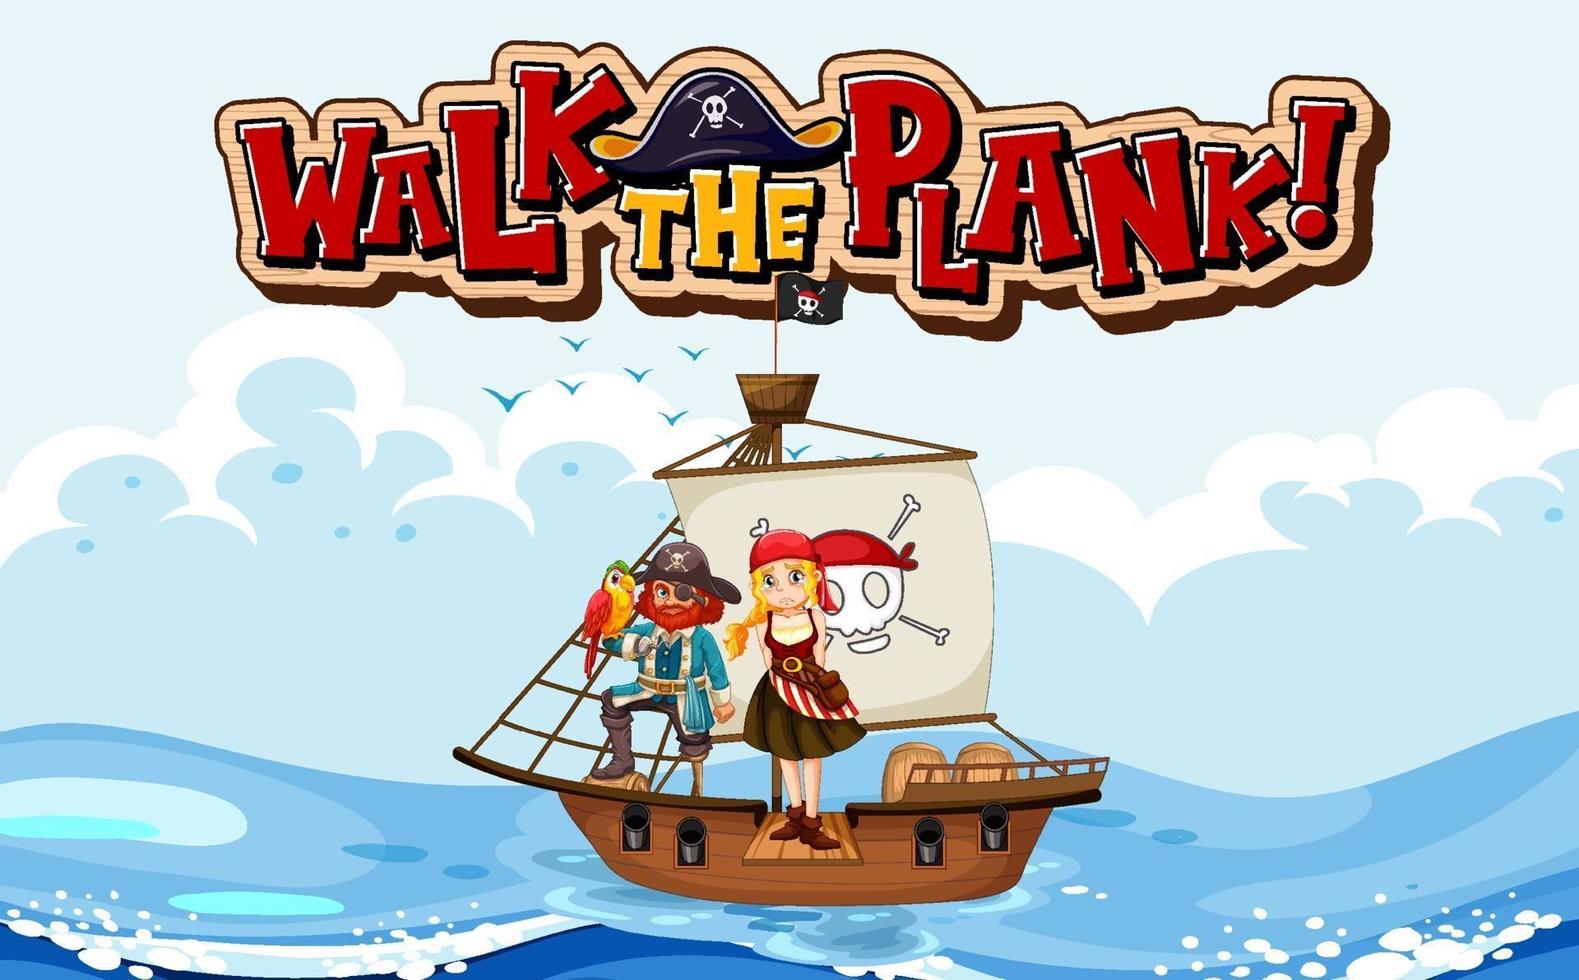 Walk the plank font banner with a pirate standing on the plank vector